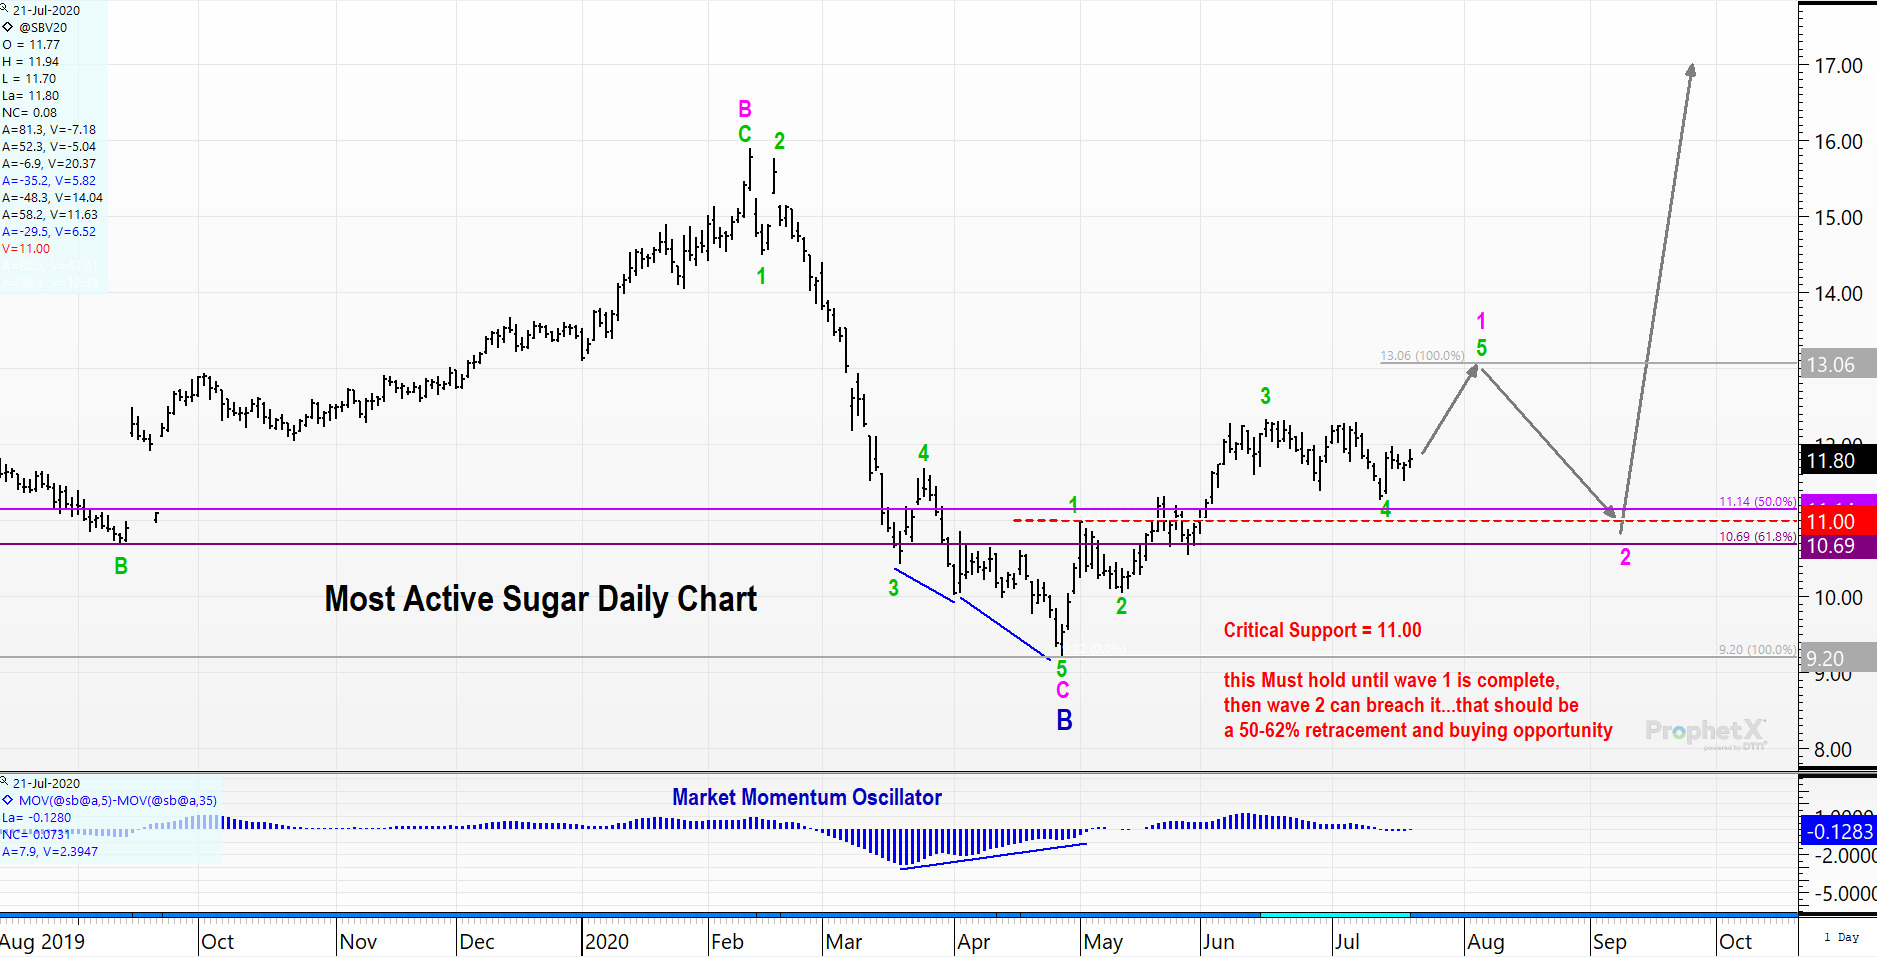 Most Active Daily Sugar Futures Contract